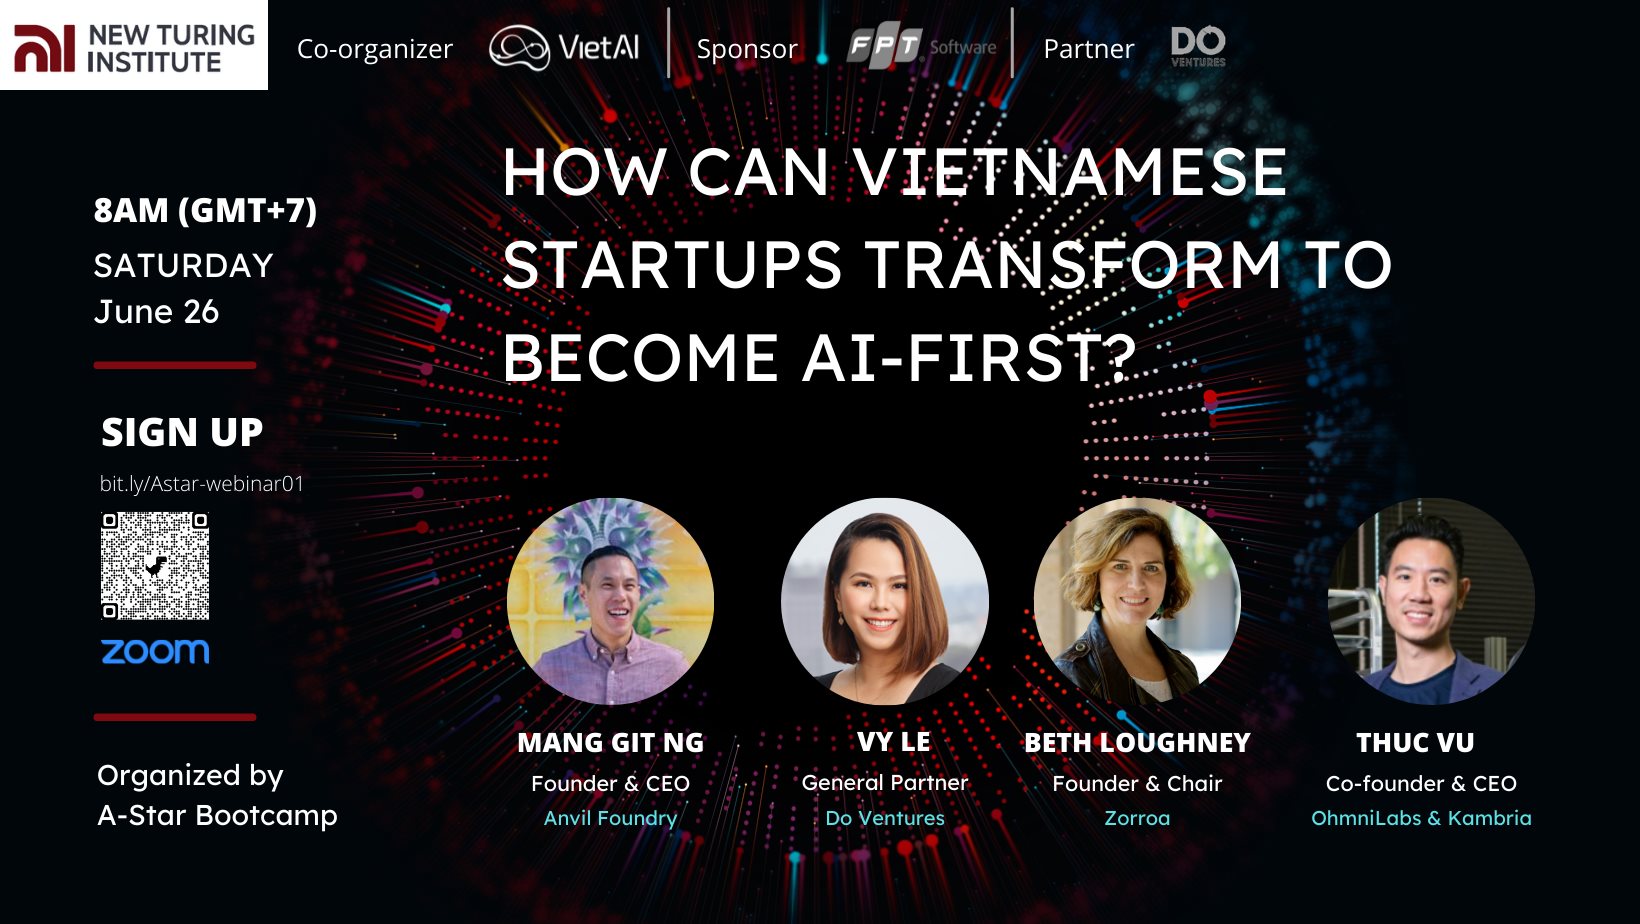 How can Vietnamese startups transform to become AI-first?